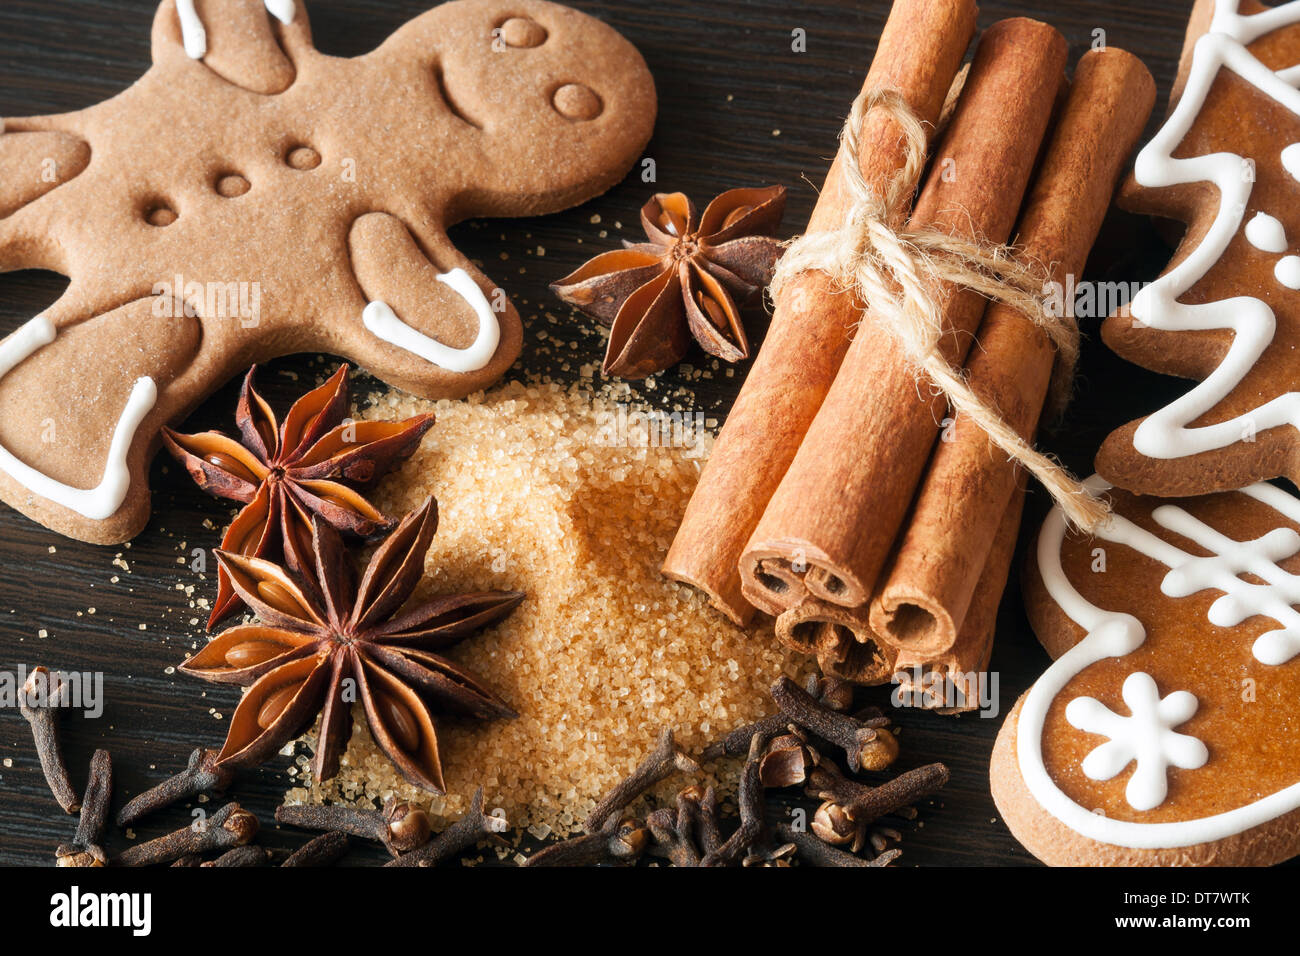 Cookies and various spices - anise, cinnamon, clove and cane sugar Stock Photo